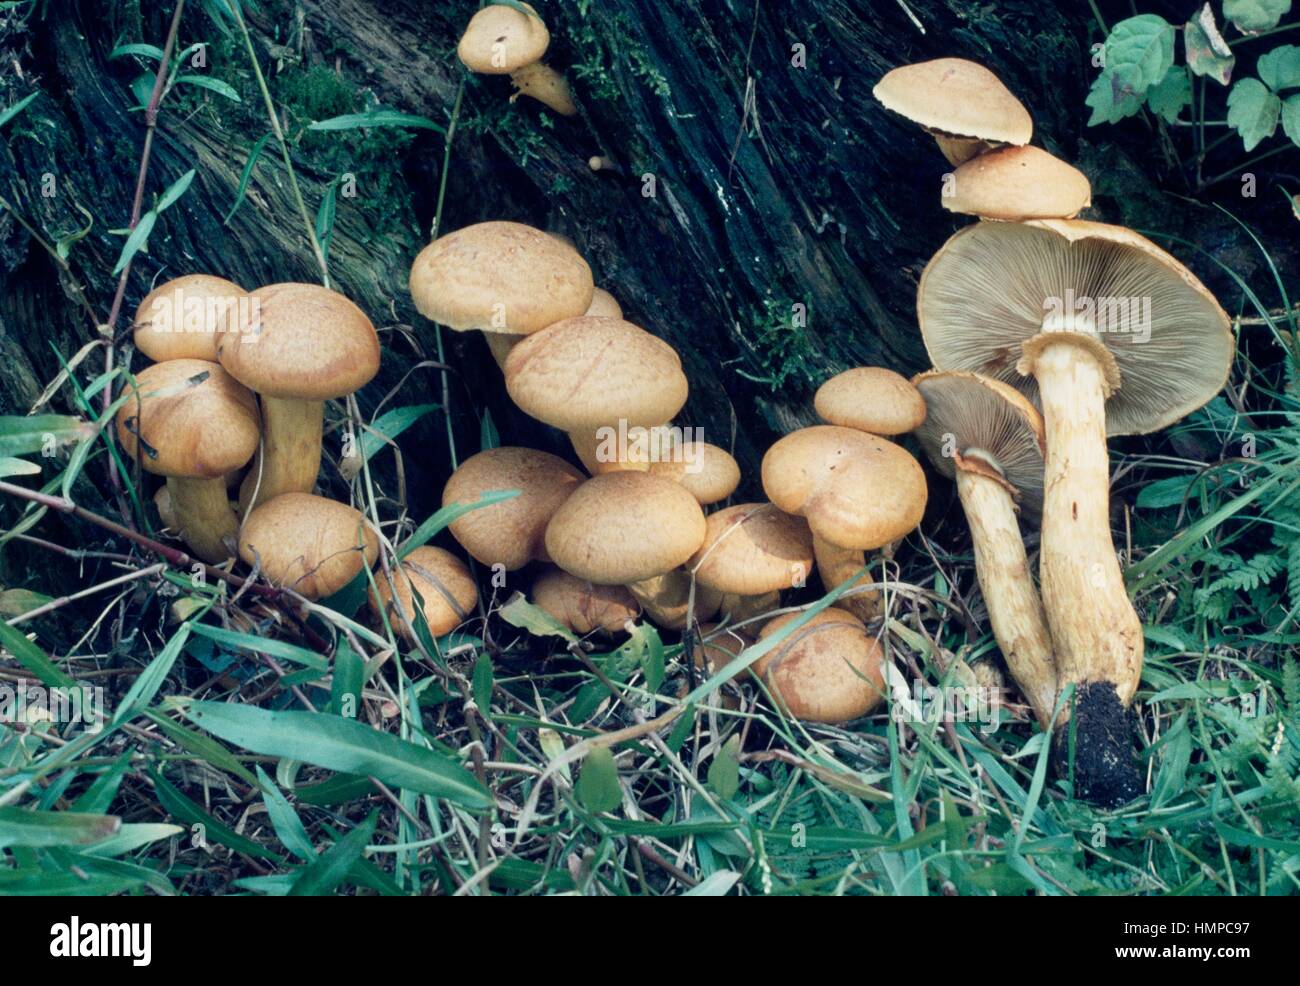 Example of Laughing gym, Laughing Jim, or Spectacular rustgill, (Gymnopilus spectabilis), its name derives from its hallucinogenic properties, Cortinariacee. Stock Photo